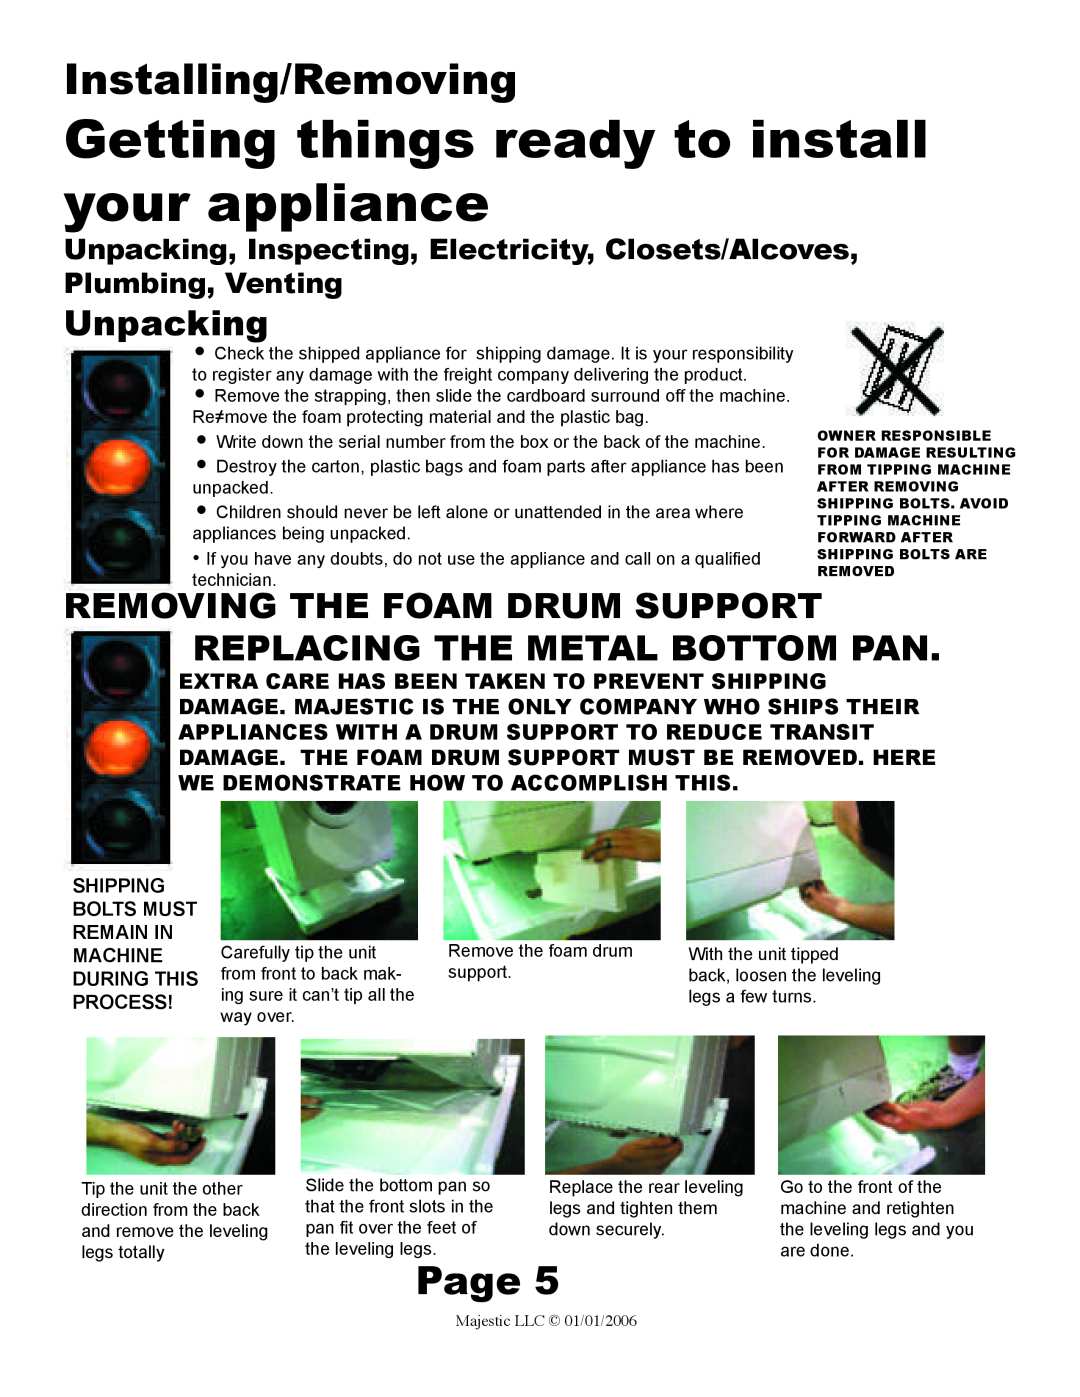 Majestic Appliances MJ-9200W owner manual Installing/Removing, Page, Unpacking, Removing The Foam Drum Support 